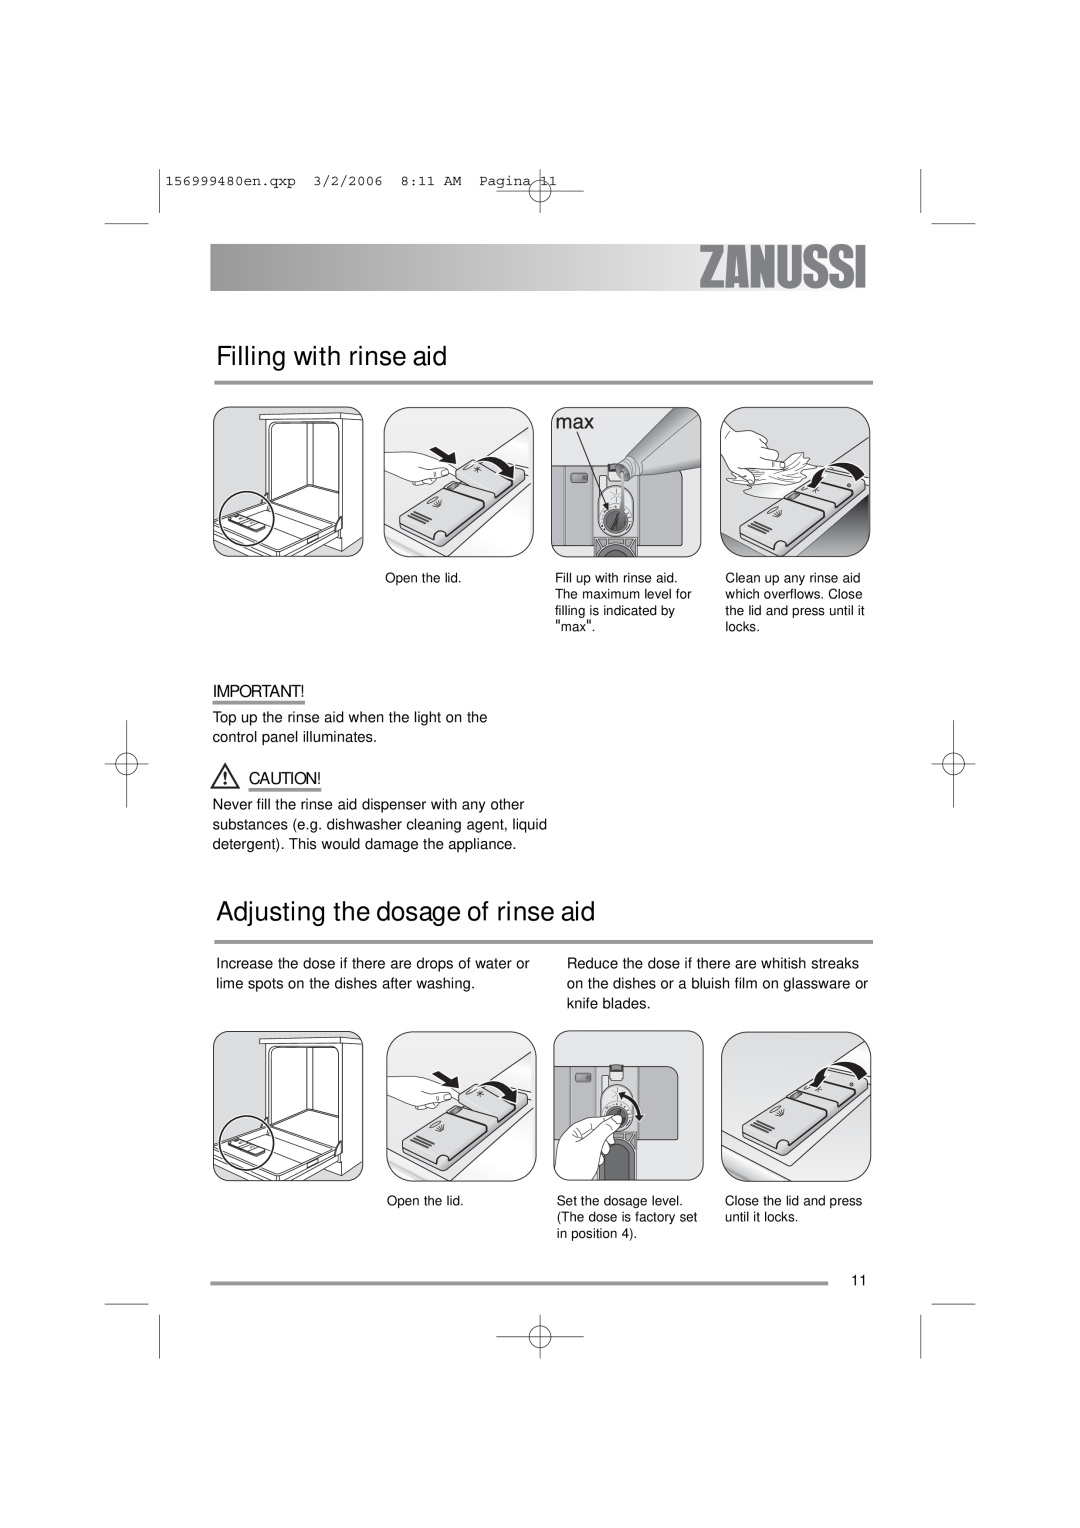 Zanussi ZDF311 user manual Filling with rinse aid, Adjusting the dosage of rinse aid 